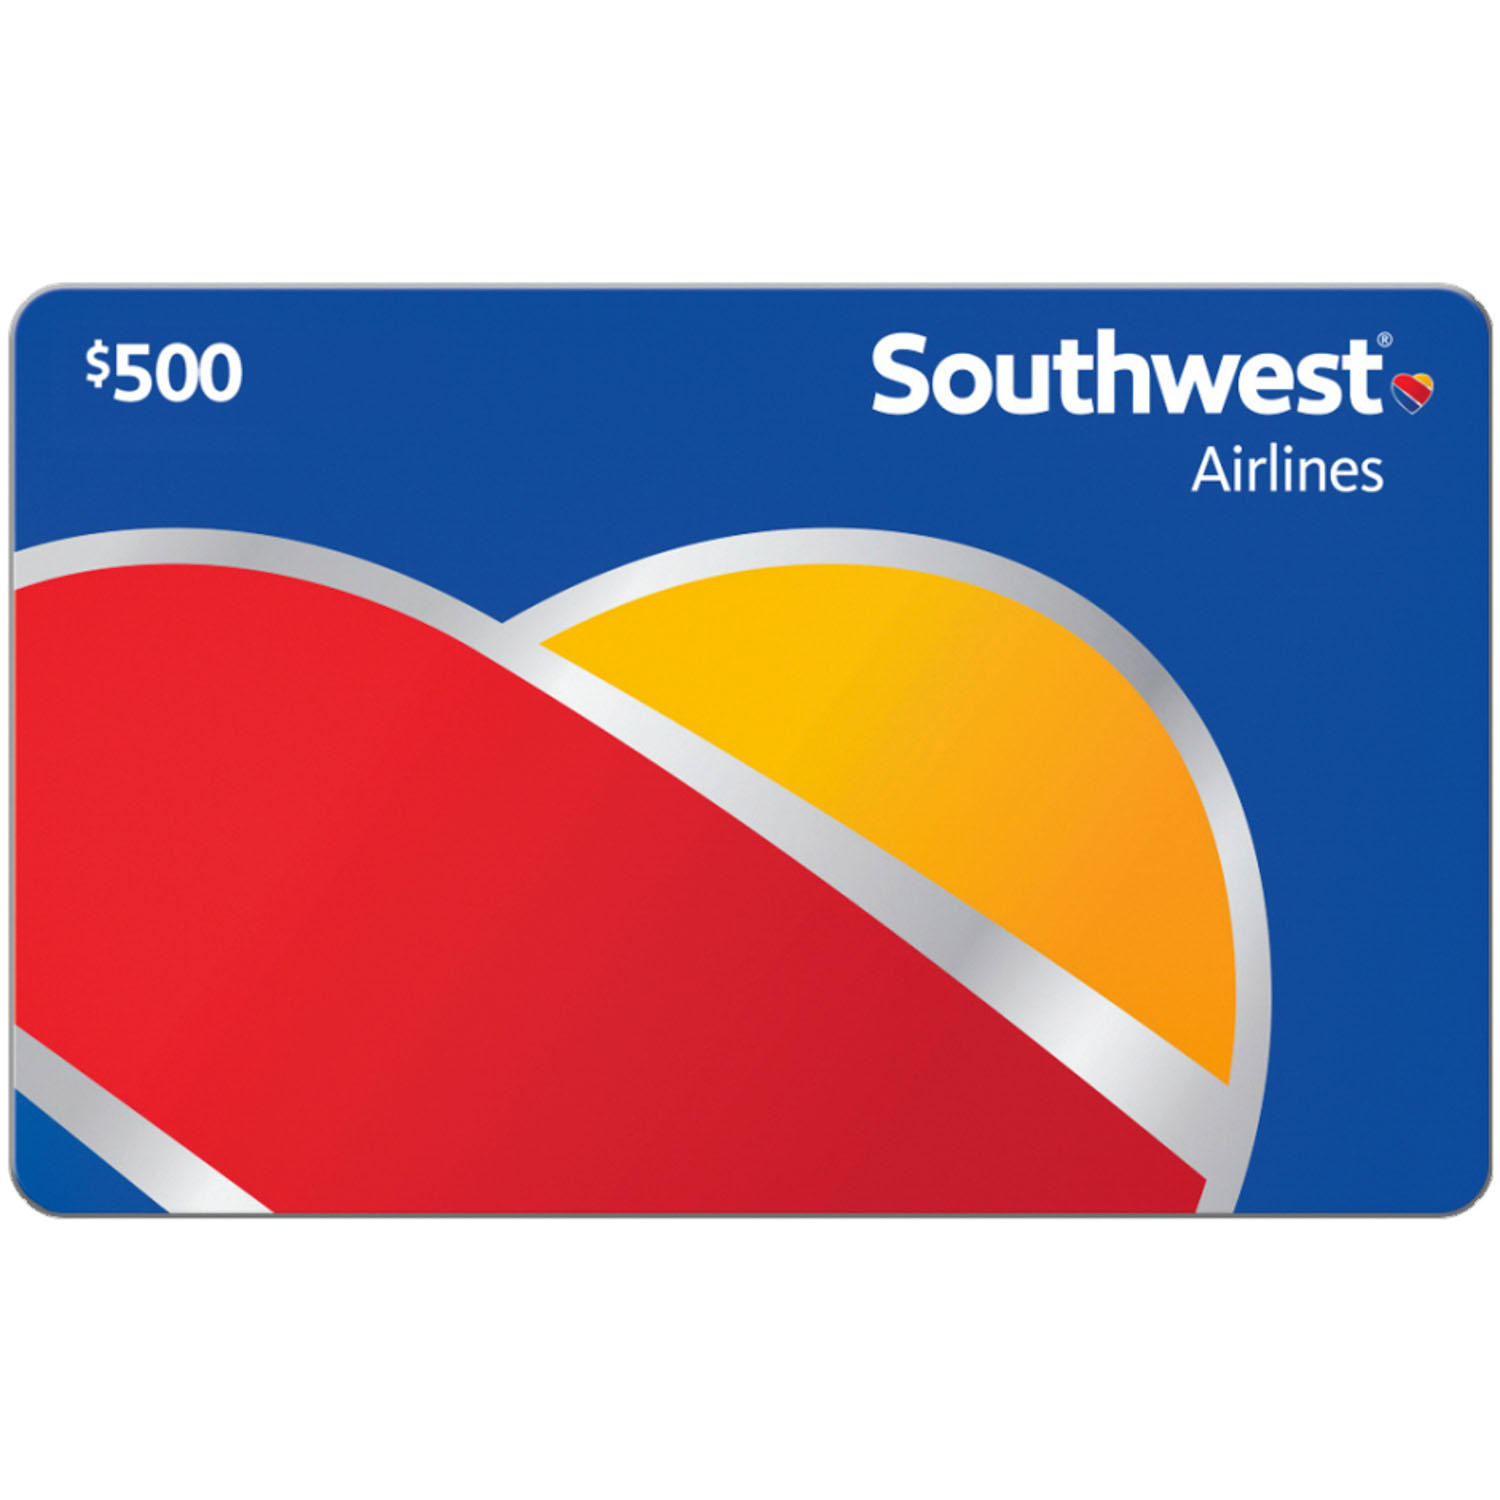 Sam's Club Members : Southwest Airlines $500 Value eGift Card (Email delivery), $450